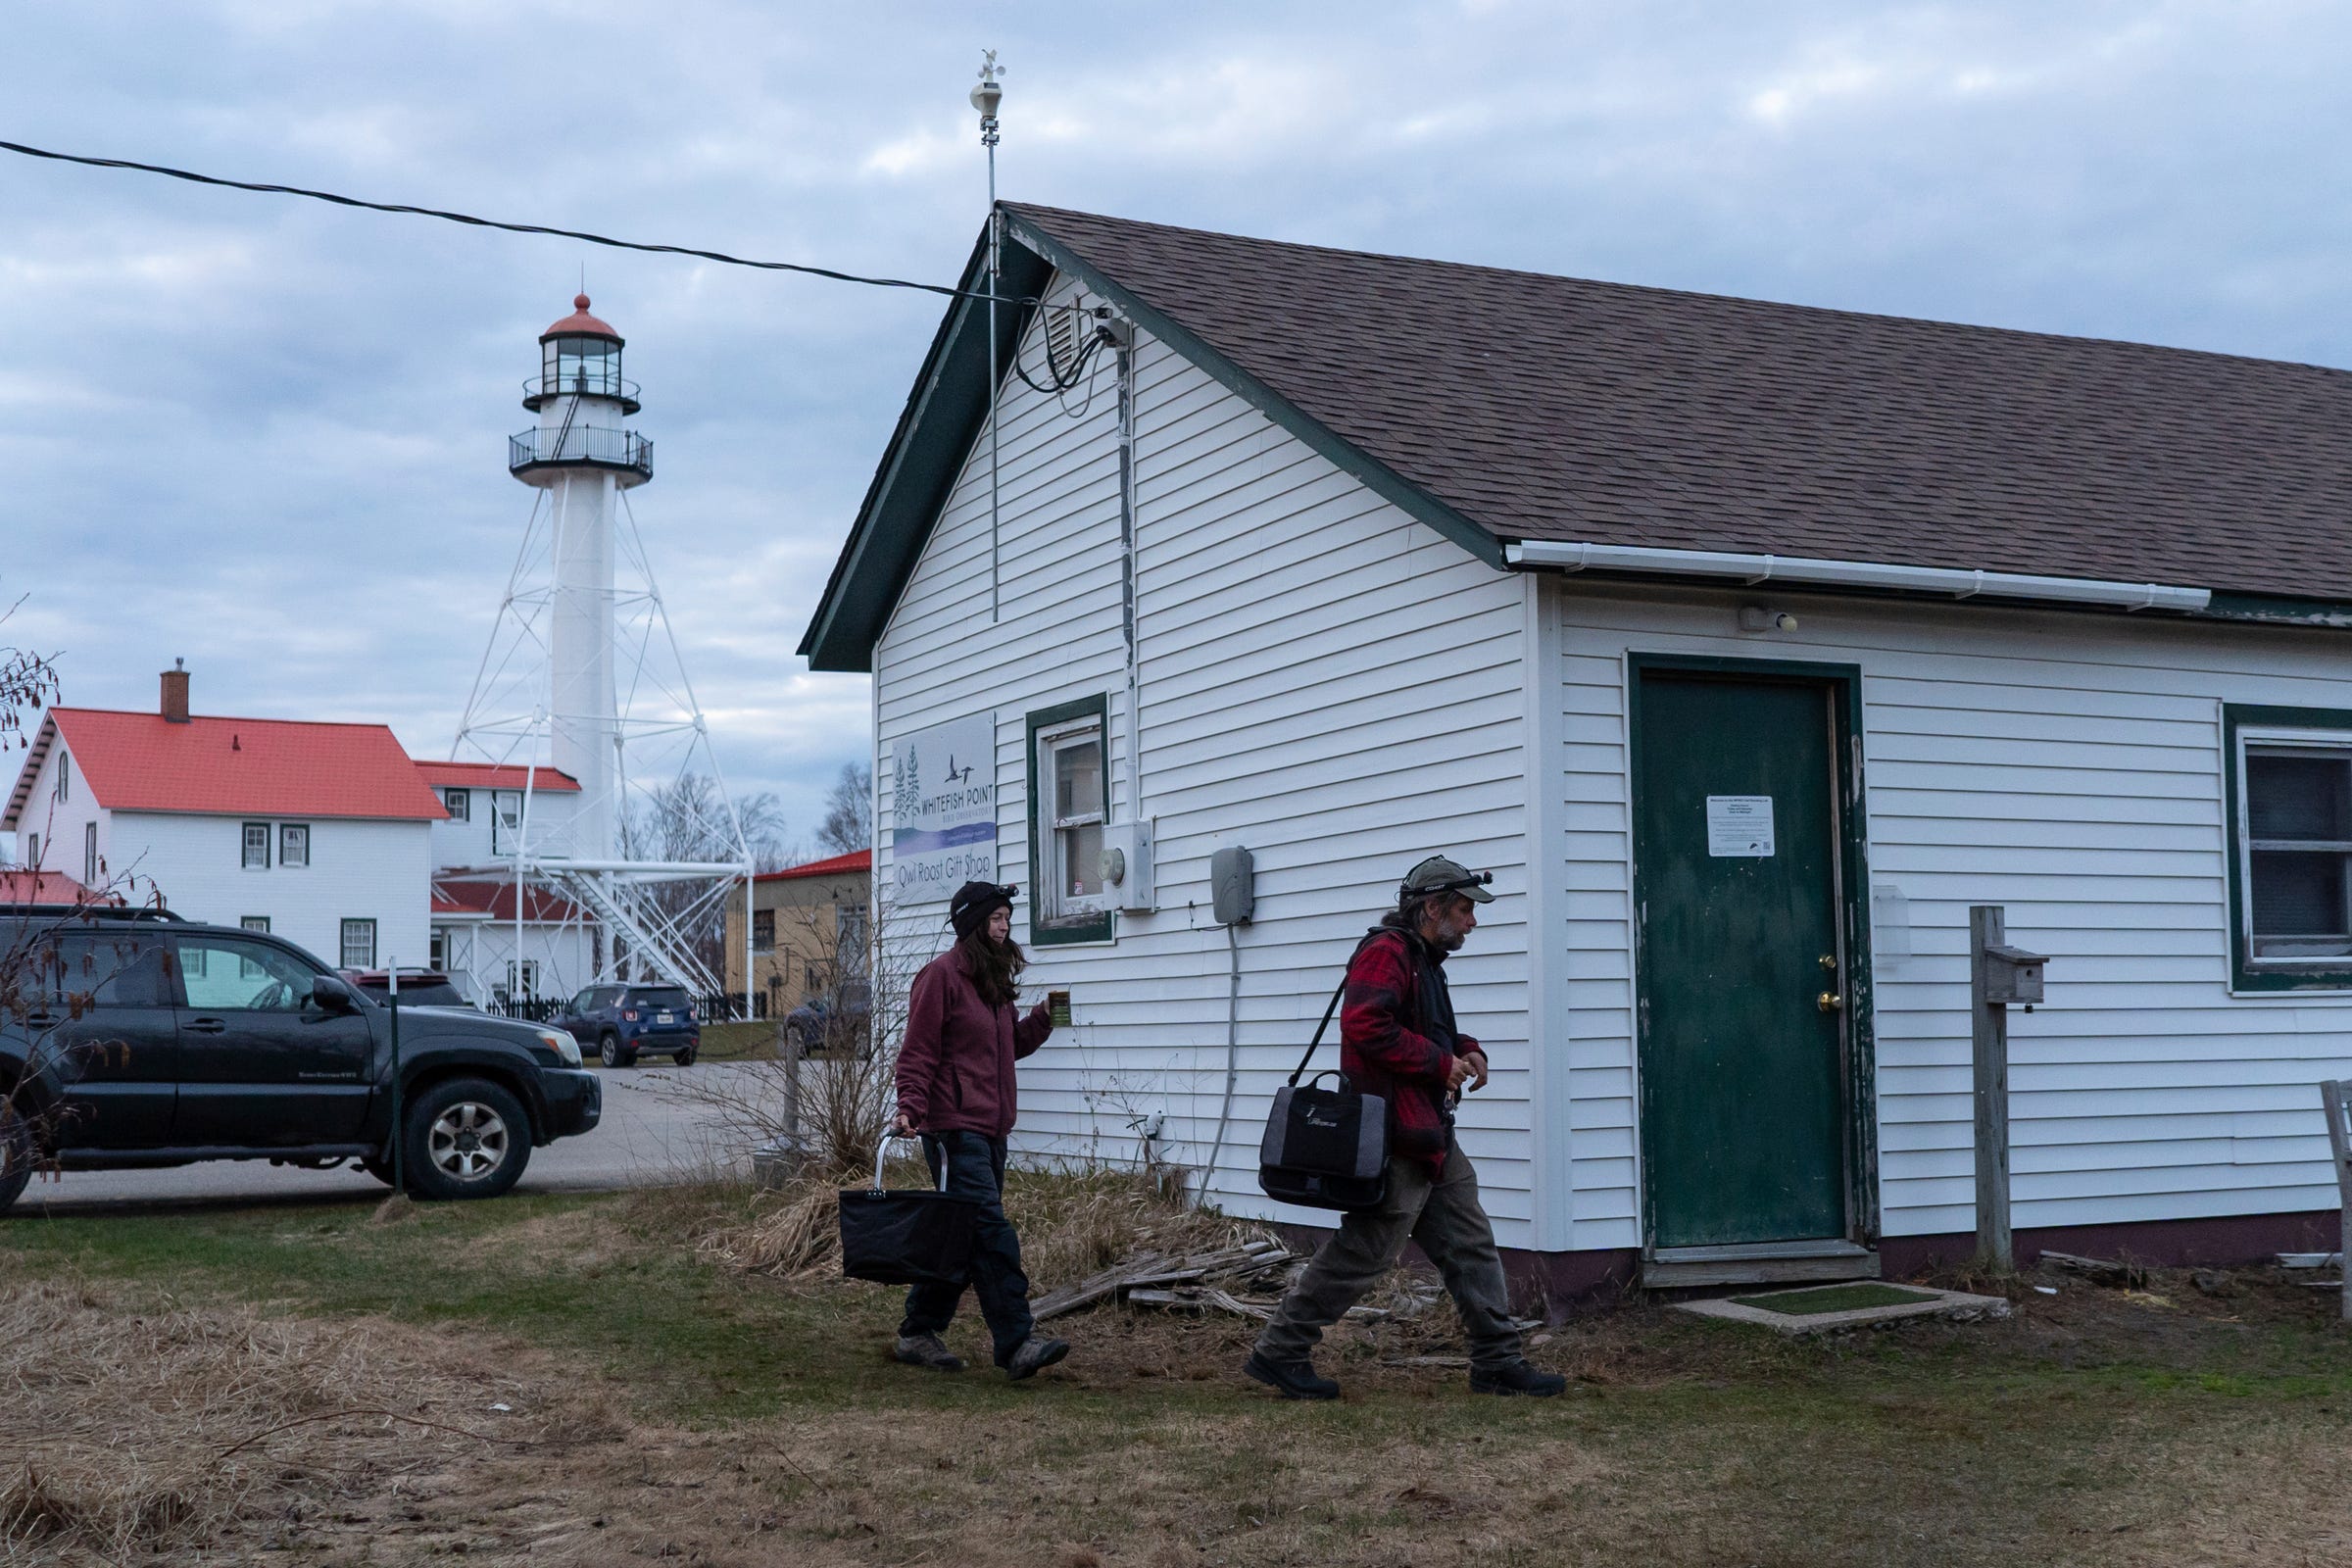 Owl banders Chris Neri, right, and Nova Mackentley arrive at their lab located in the back of a former Owl's Roost gift shop at Whitefish Point Bird Observatory in Paradise on Friday, April 21, 2023, before starting their night banding owls captured along the Lake Superior bay located in Michigan's Upper Peninsula.